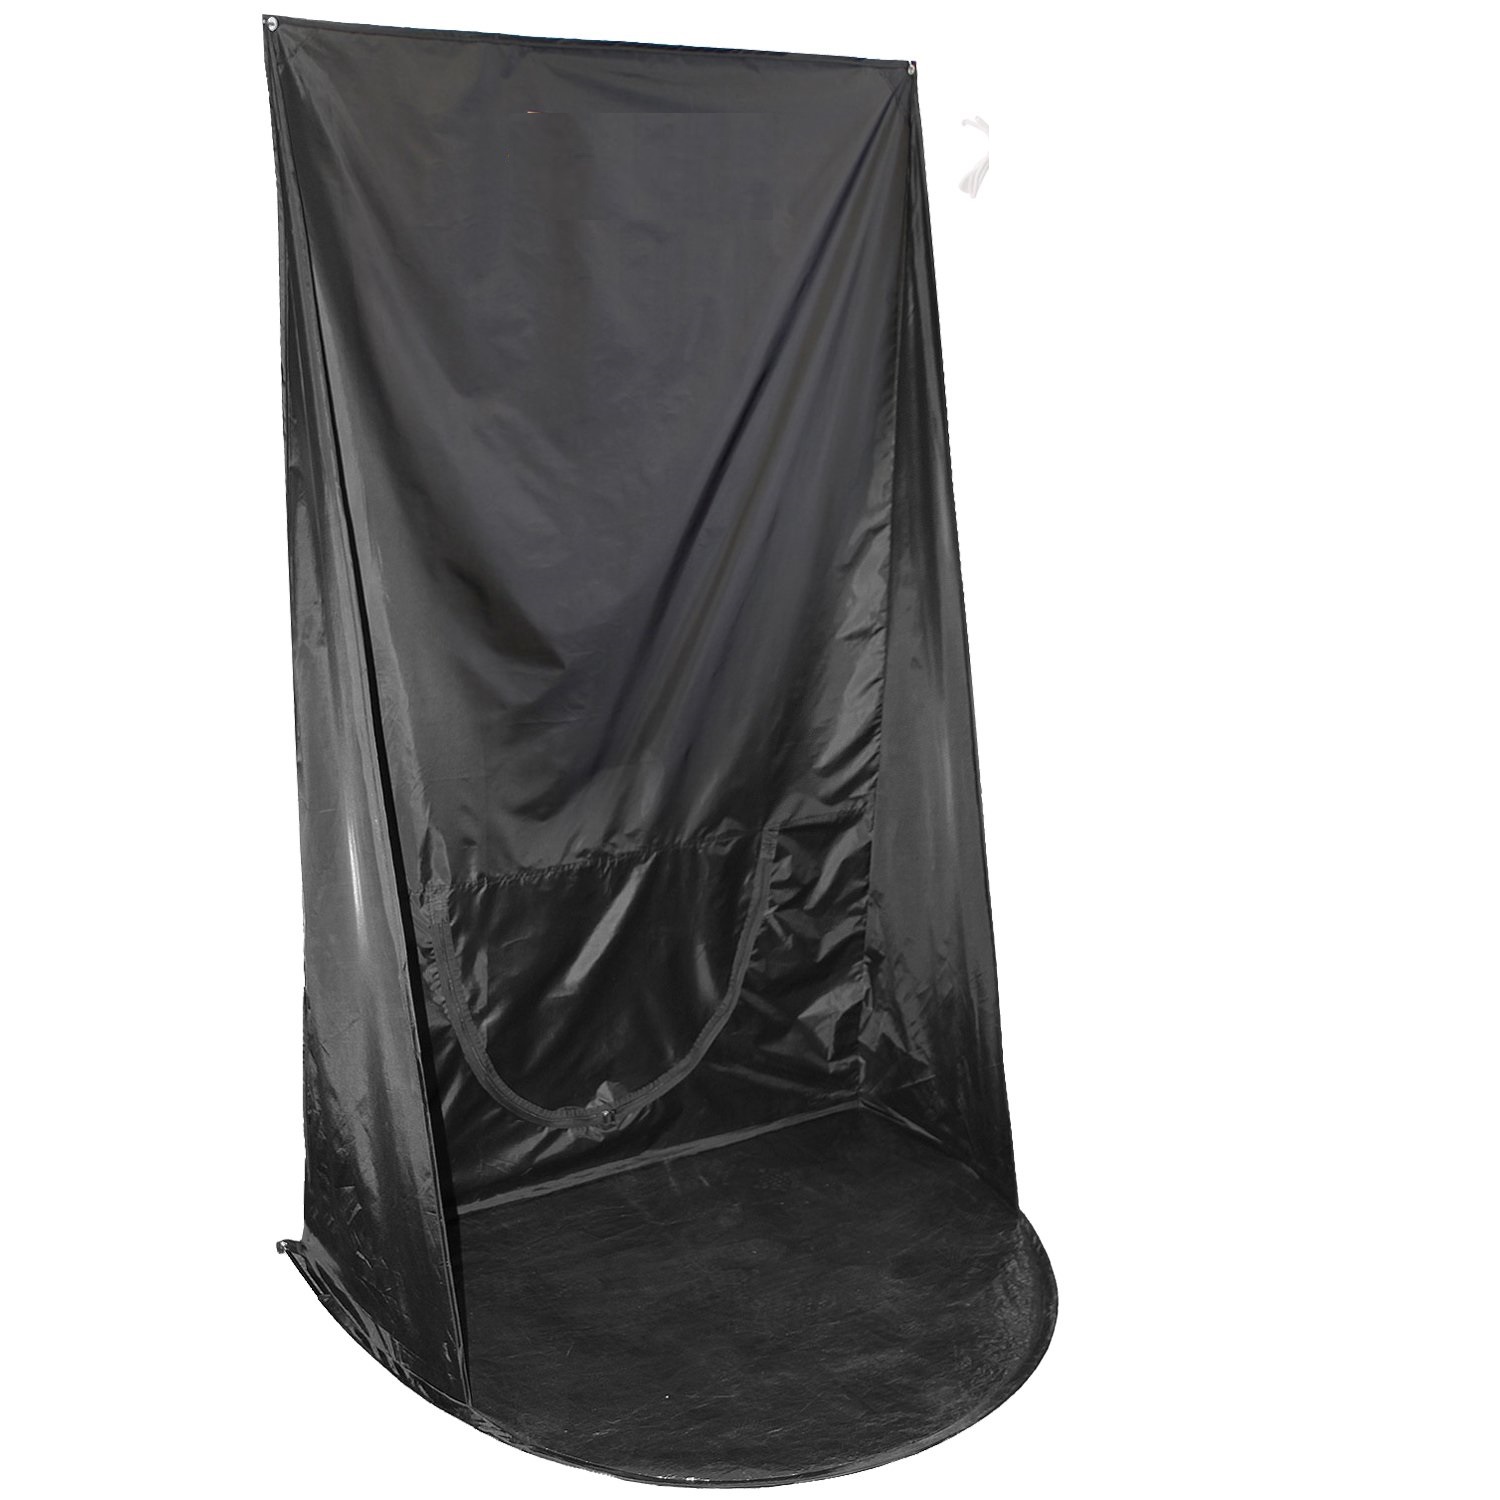 Spray Tanning wall hanging tanning tent